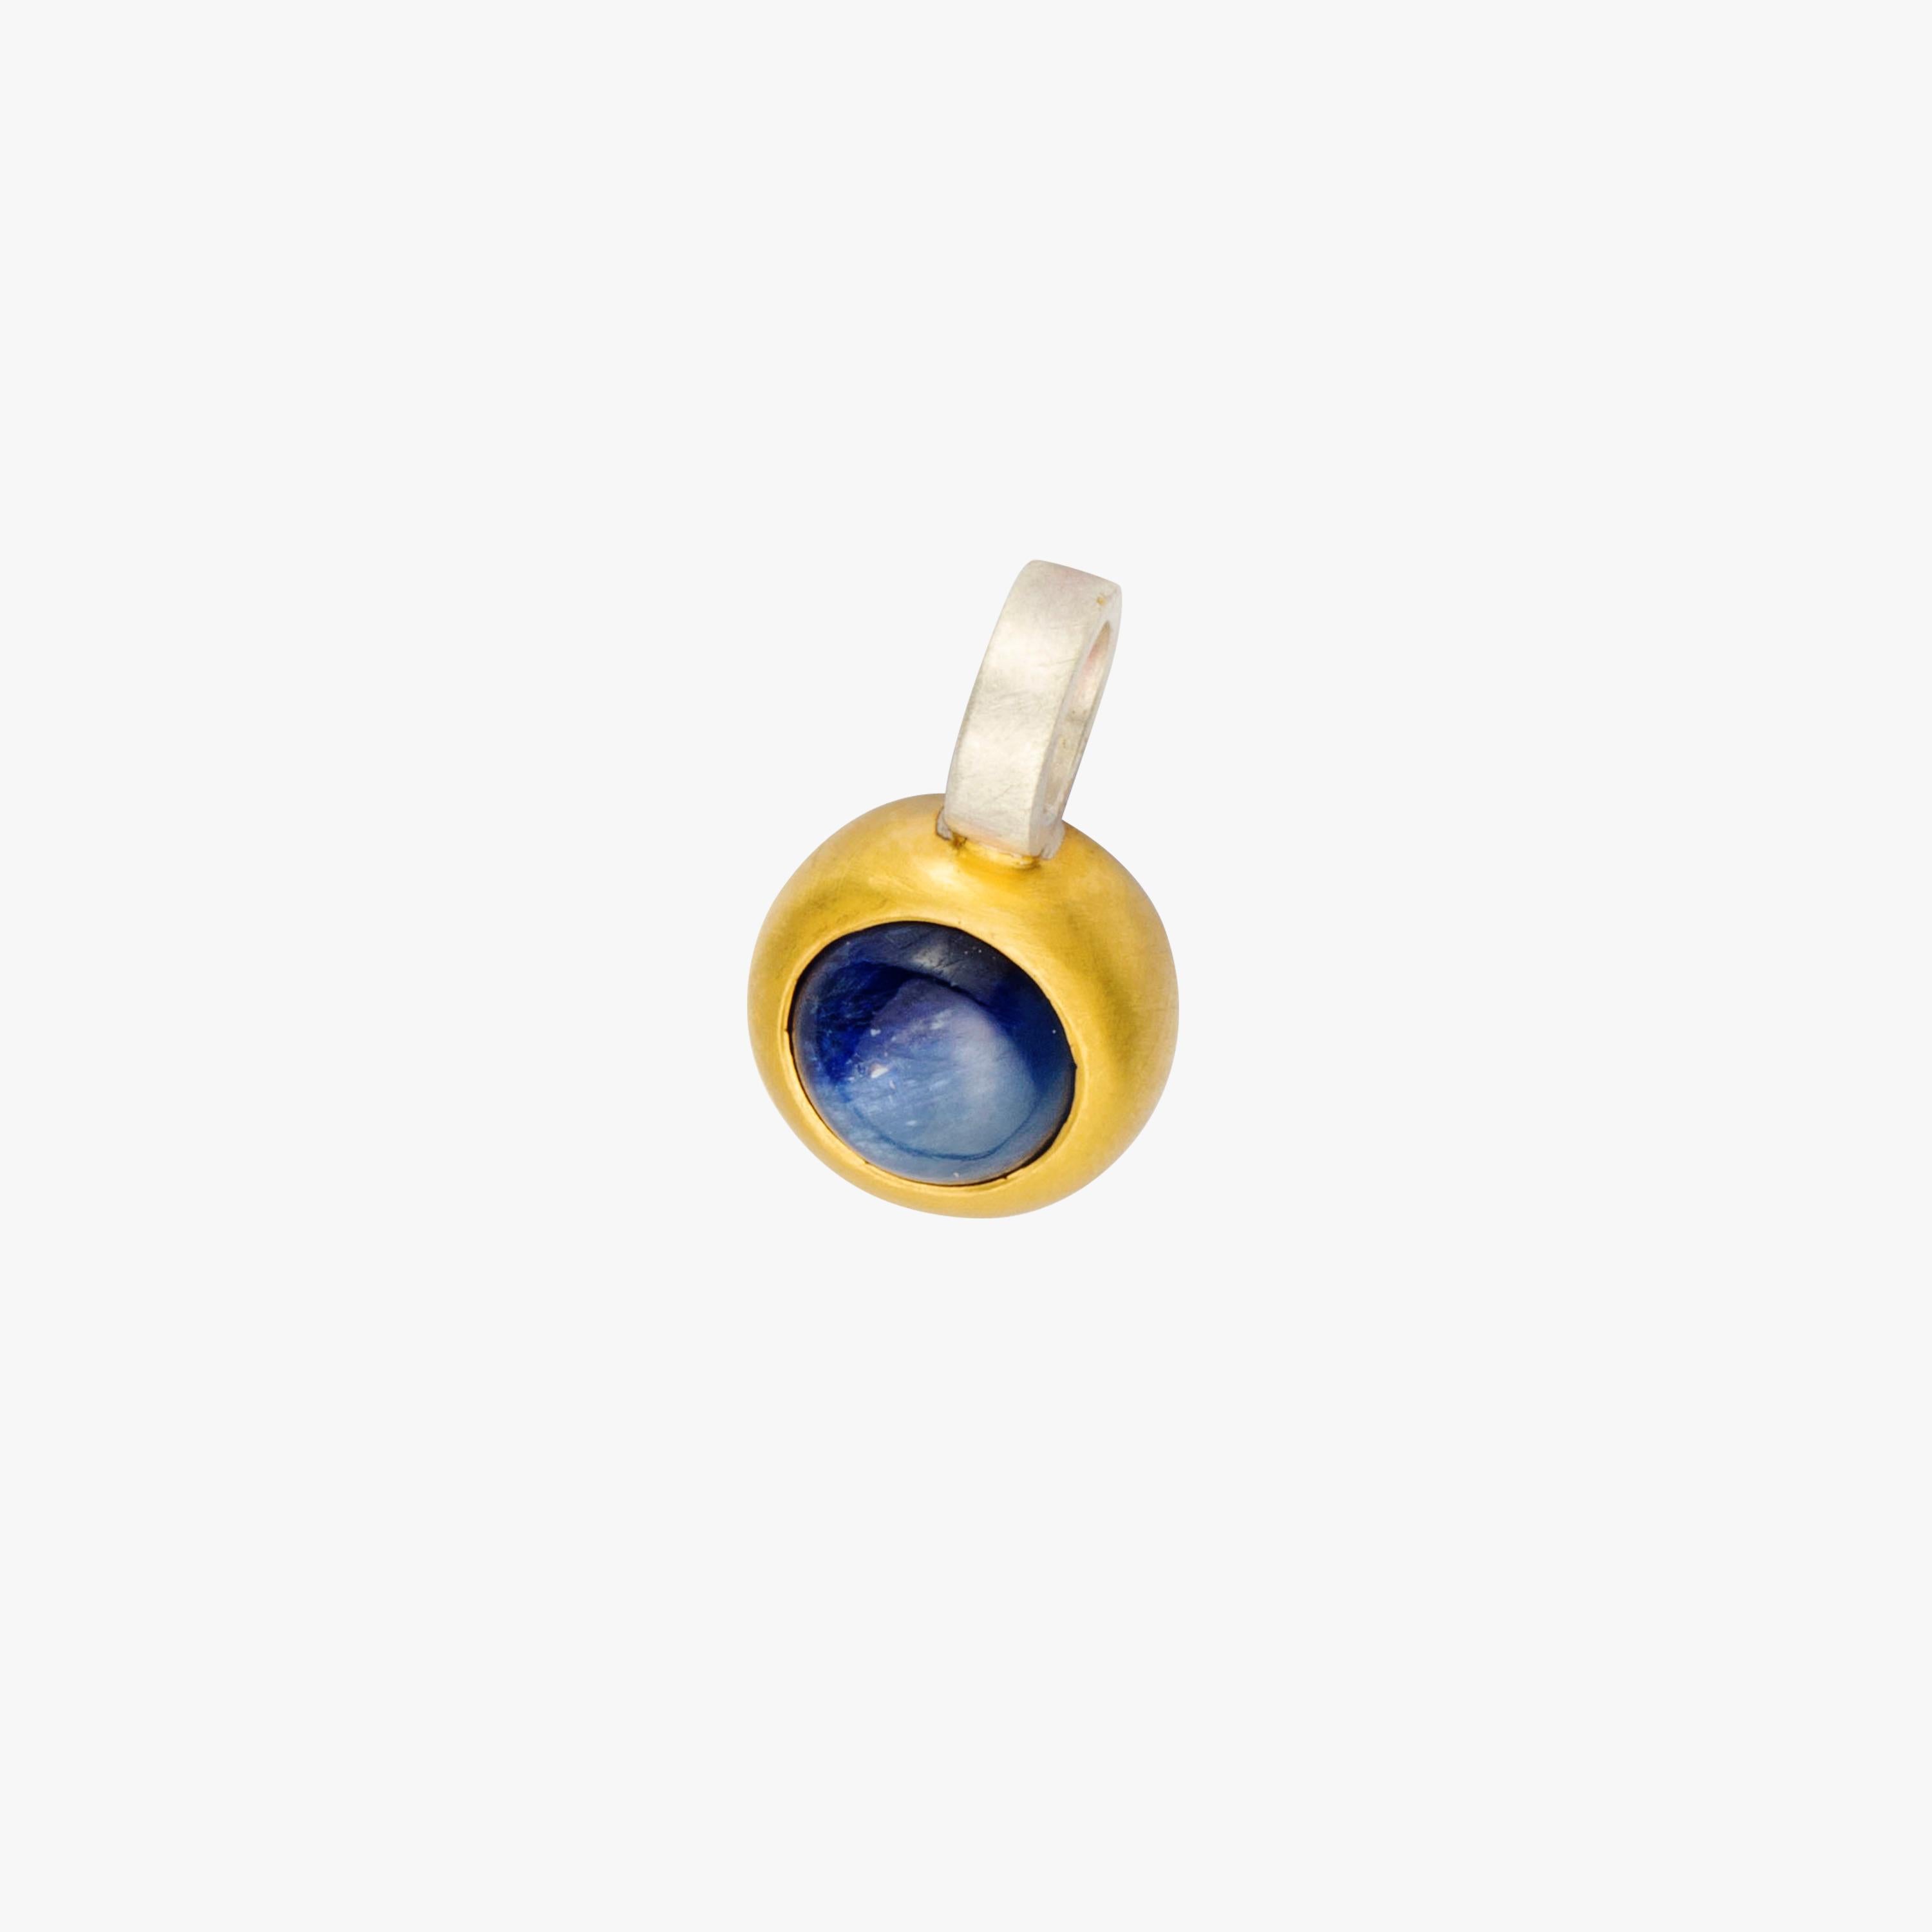 The gold-plated kyanite pendant made of sterling silver is part of the Kyanite Classics and is a symbol of elegance and high-quality design by Monika Herré.

 

The fine rail is precisely worked into the matt gold-plated setting, which stylishly